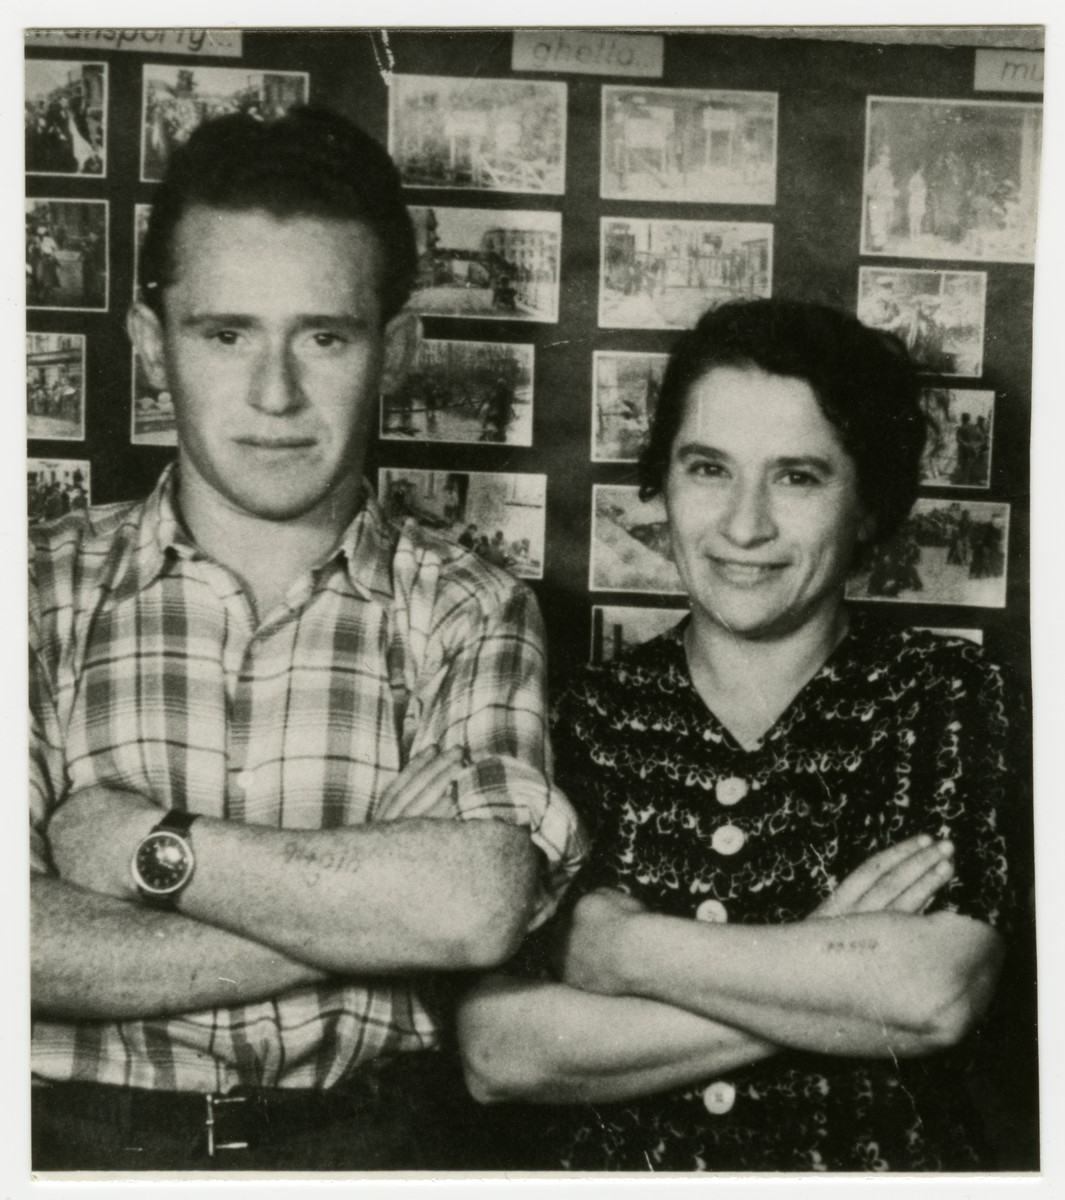 Bronislaw Gelczynski (Abraham Gordon) and an unidentified woman pose in front of a display of Holocaust photographs.